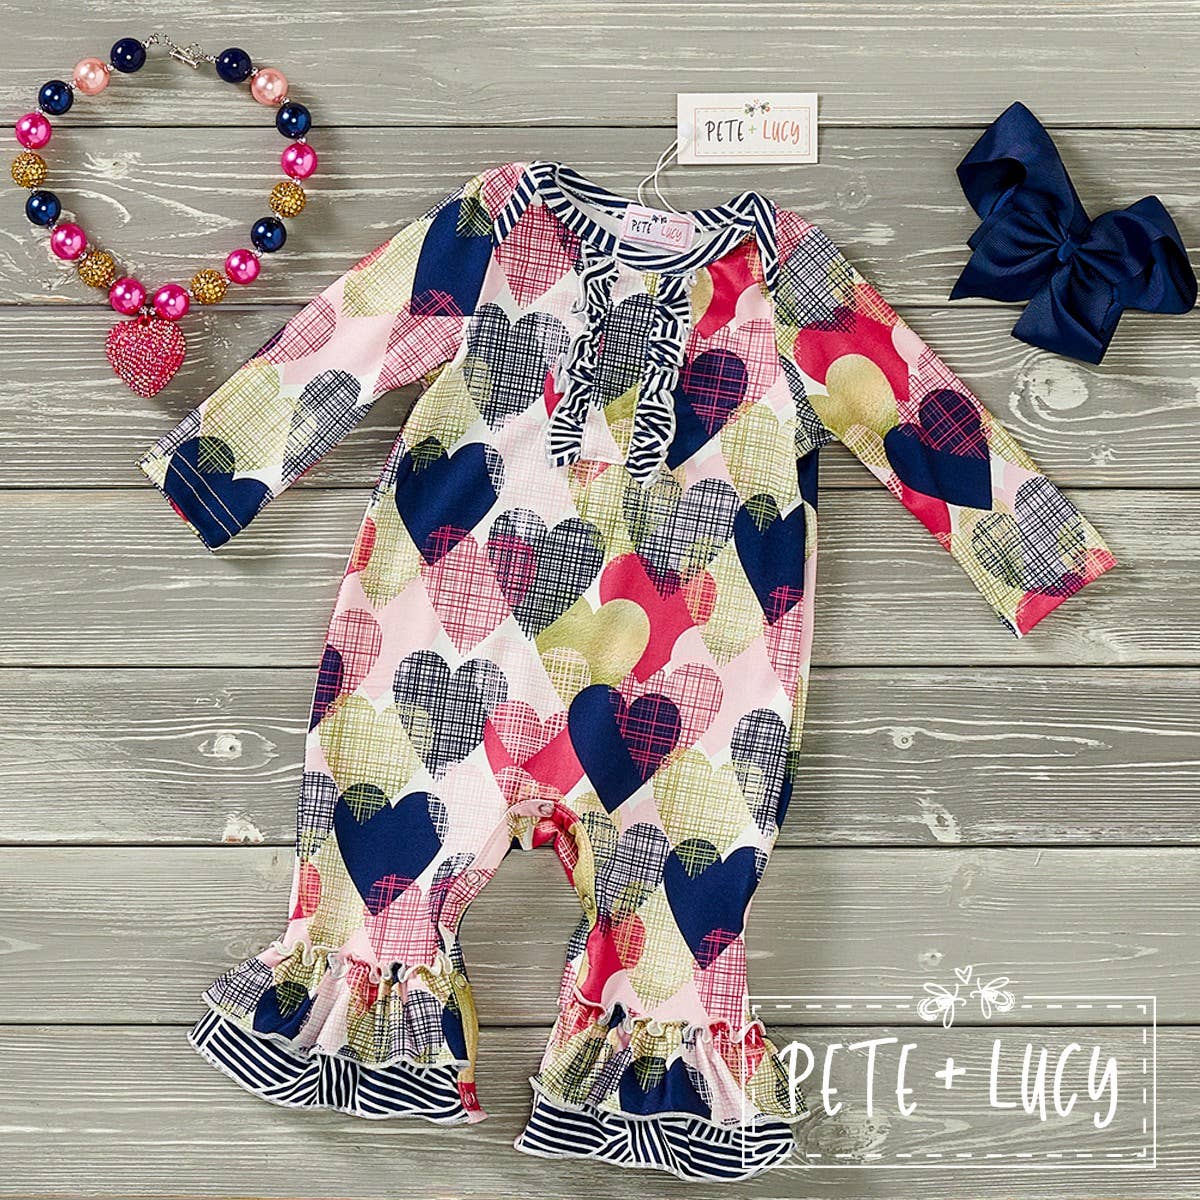 PETE + LUCY Geo Hearts Ruffle Romper 18-24 months NEW